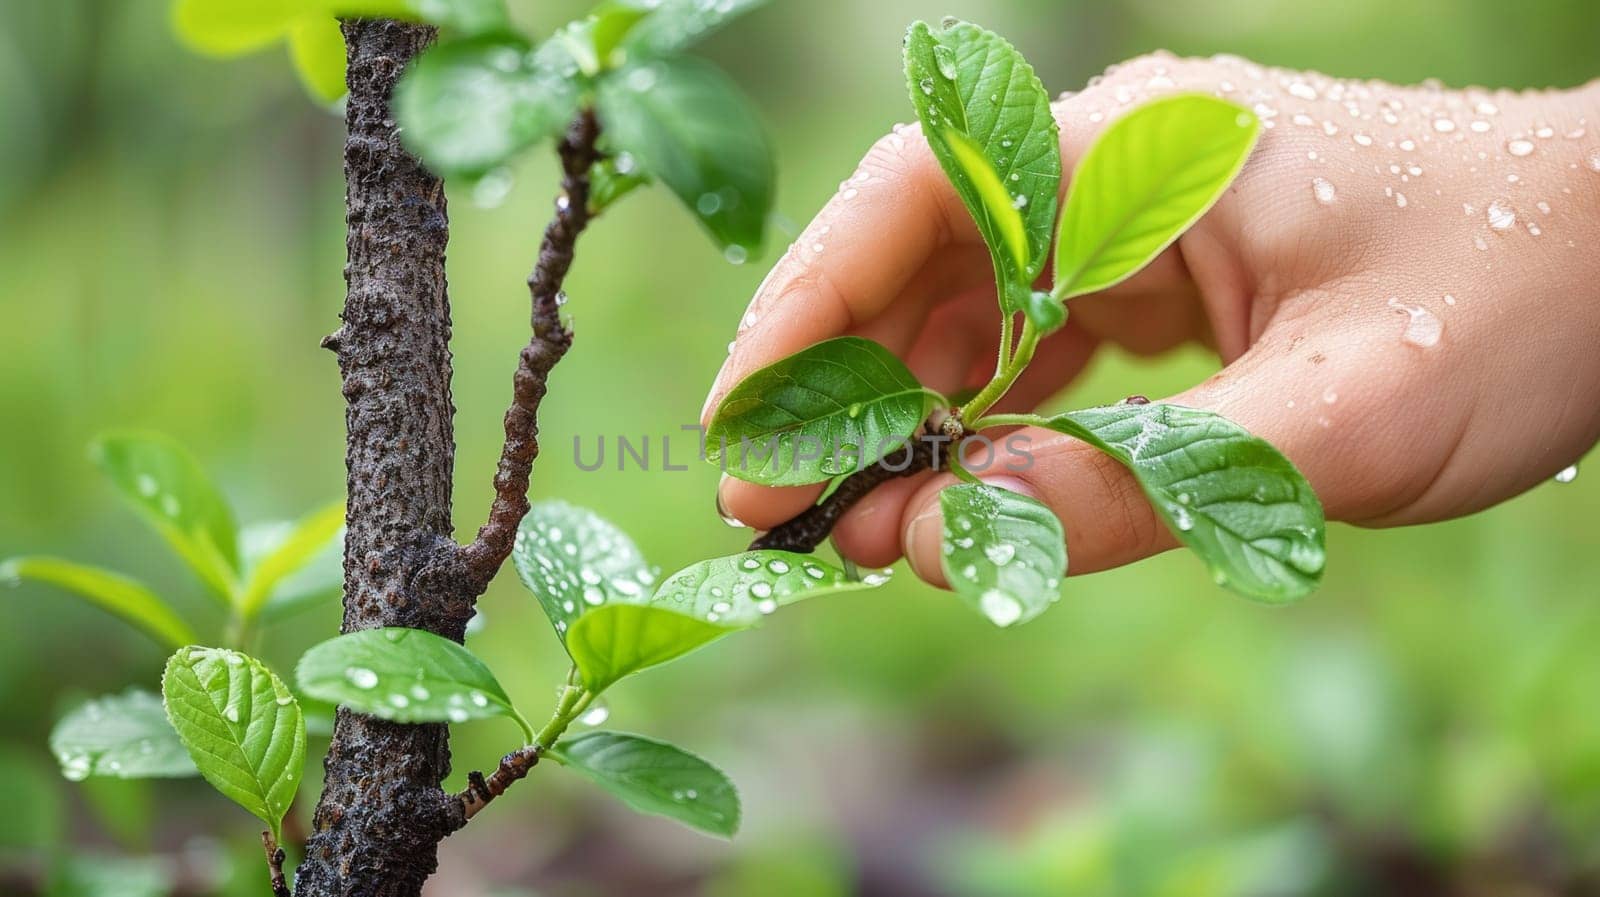 A hand reaching out to touch a green plant with water droplets, AI by starush